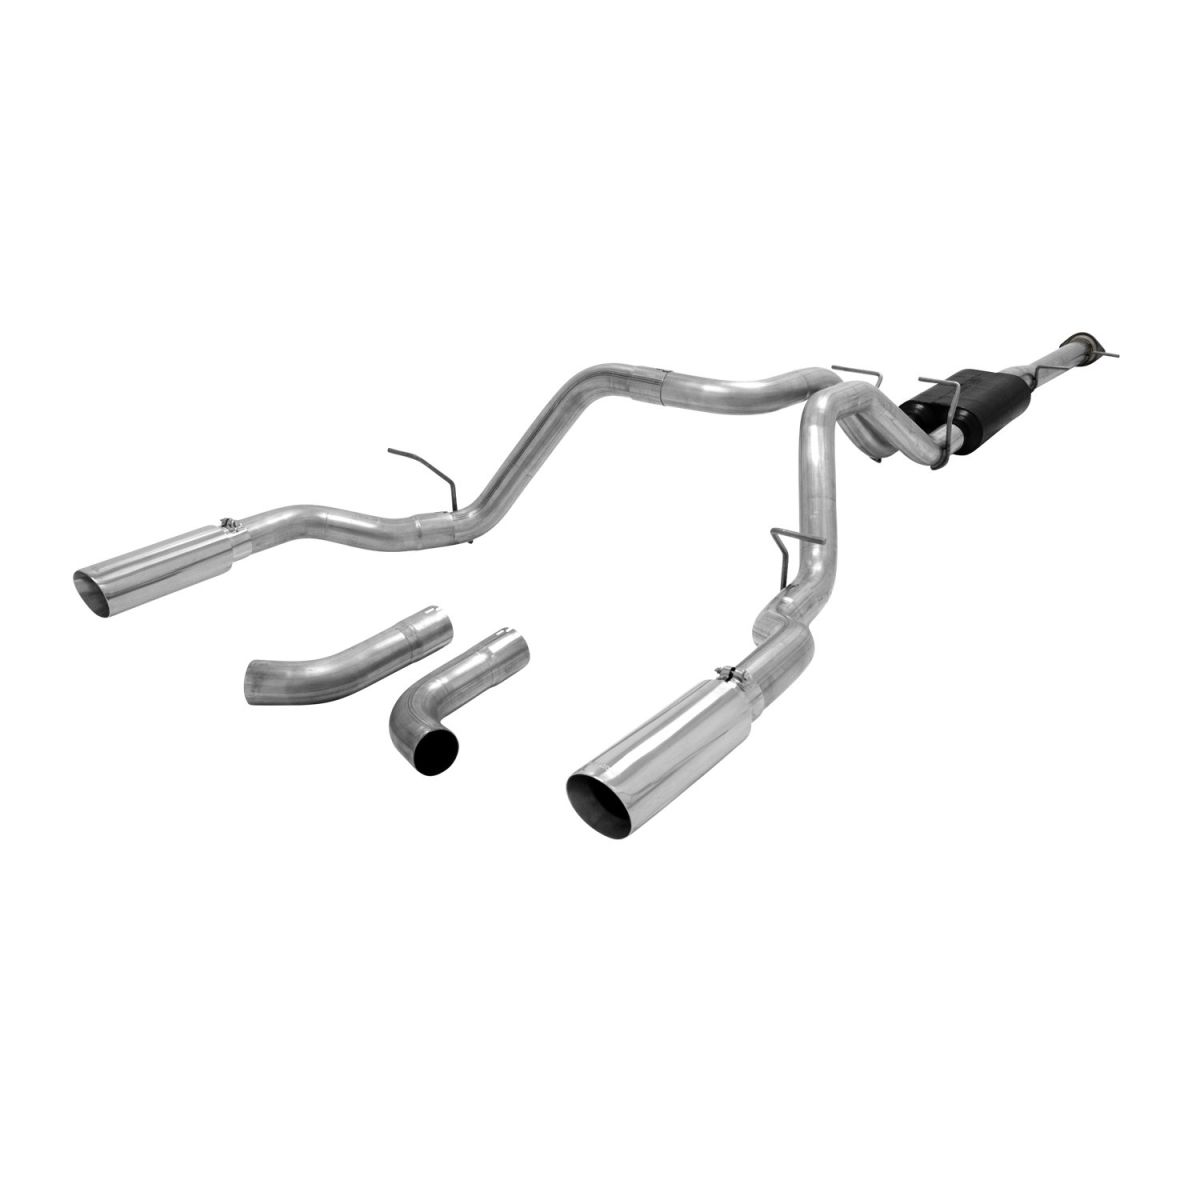 Flowmaster - Flowmaster American Thunder Cat-Back Exhaust For 2011-2019 GM 2500/3500 HD 6.0L